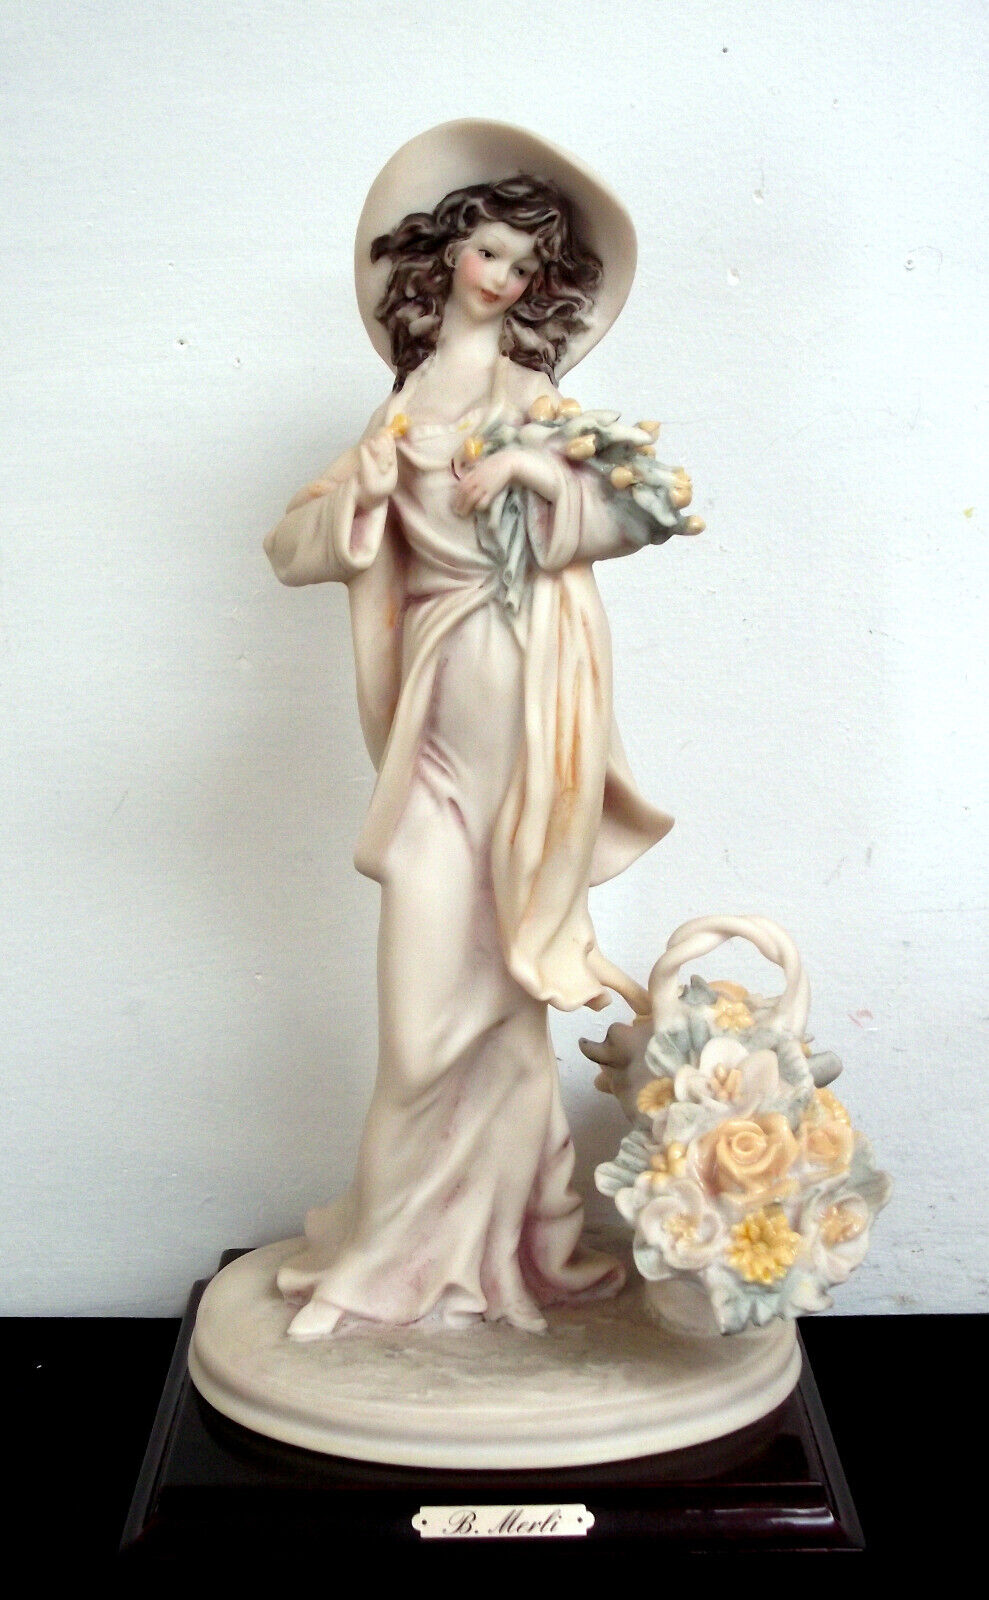 Bruno Merli 'Lady with Flowers' Capodimonte Sculpture